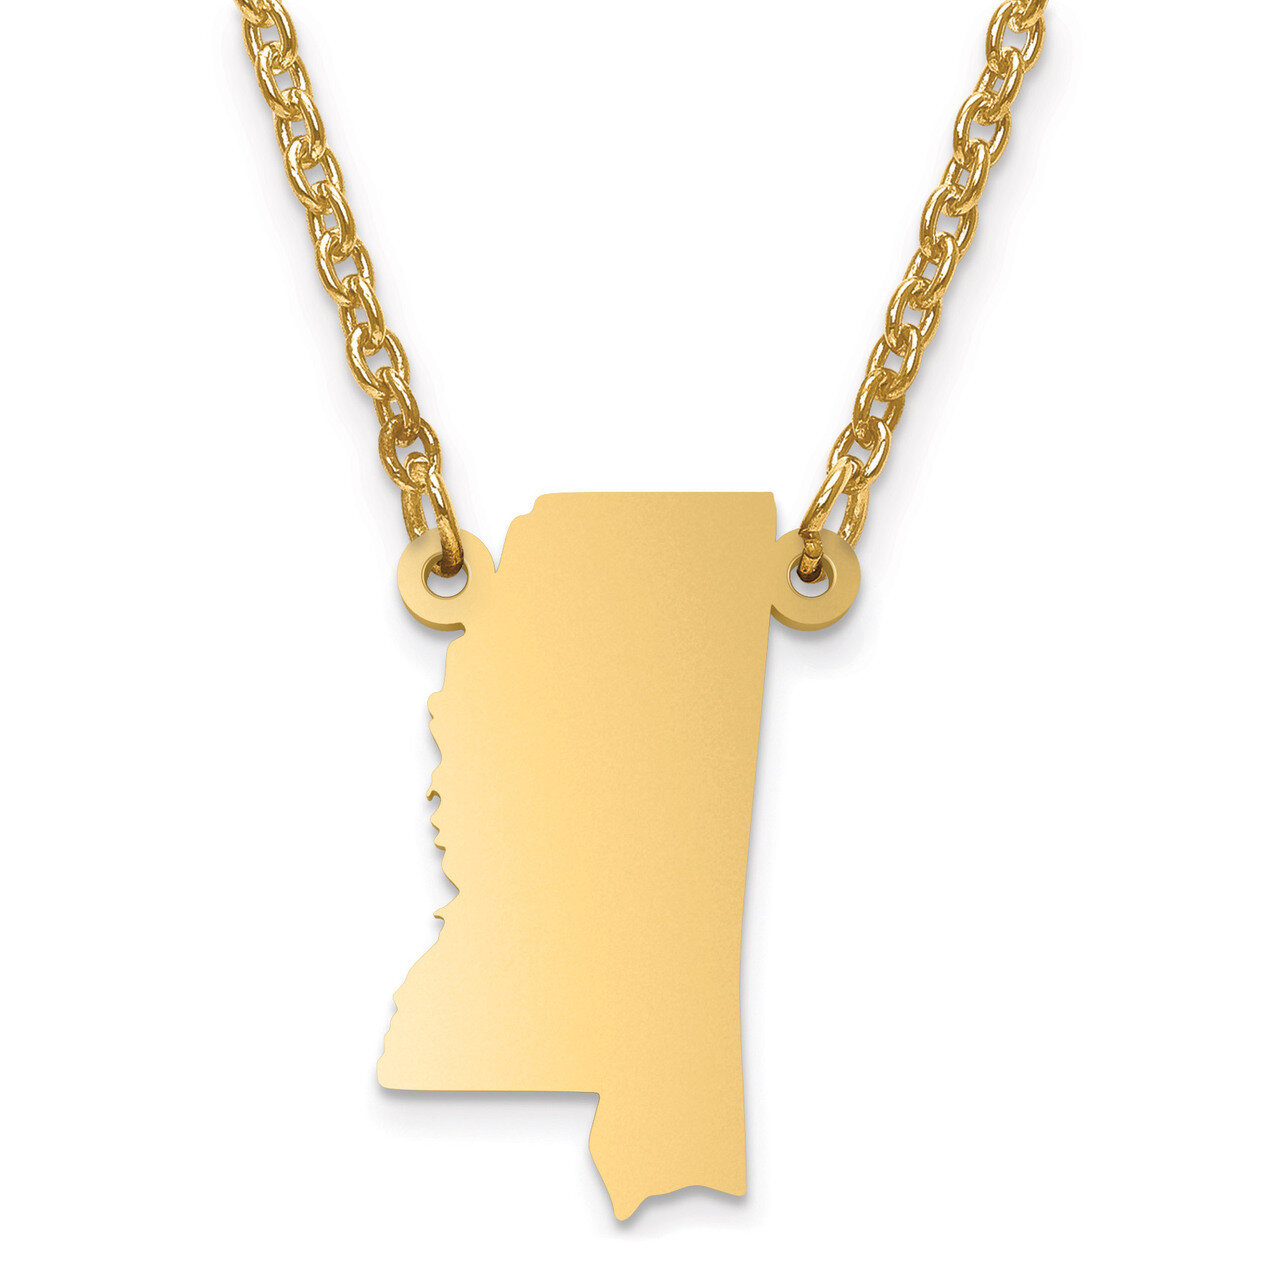 Mississippi State Pendant with Chain Engravable Gold-plated on Sterling Silver